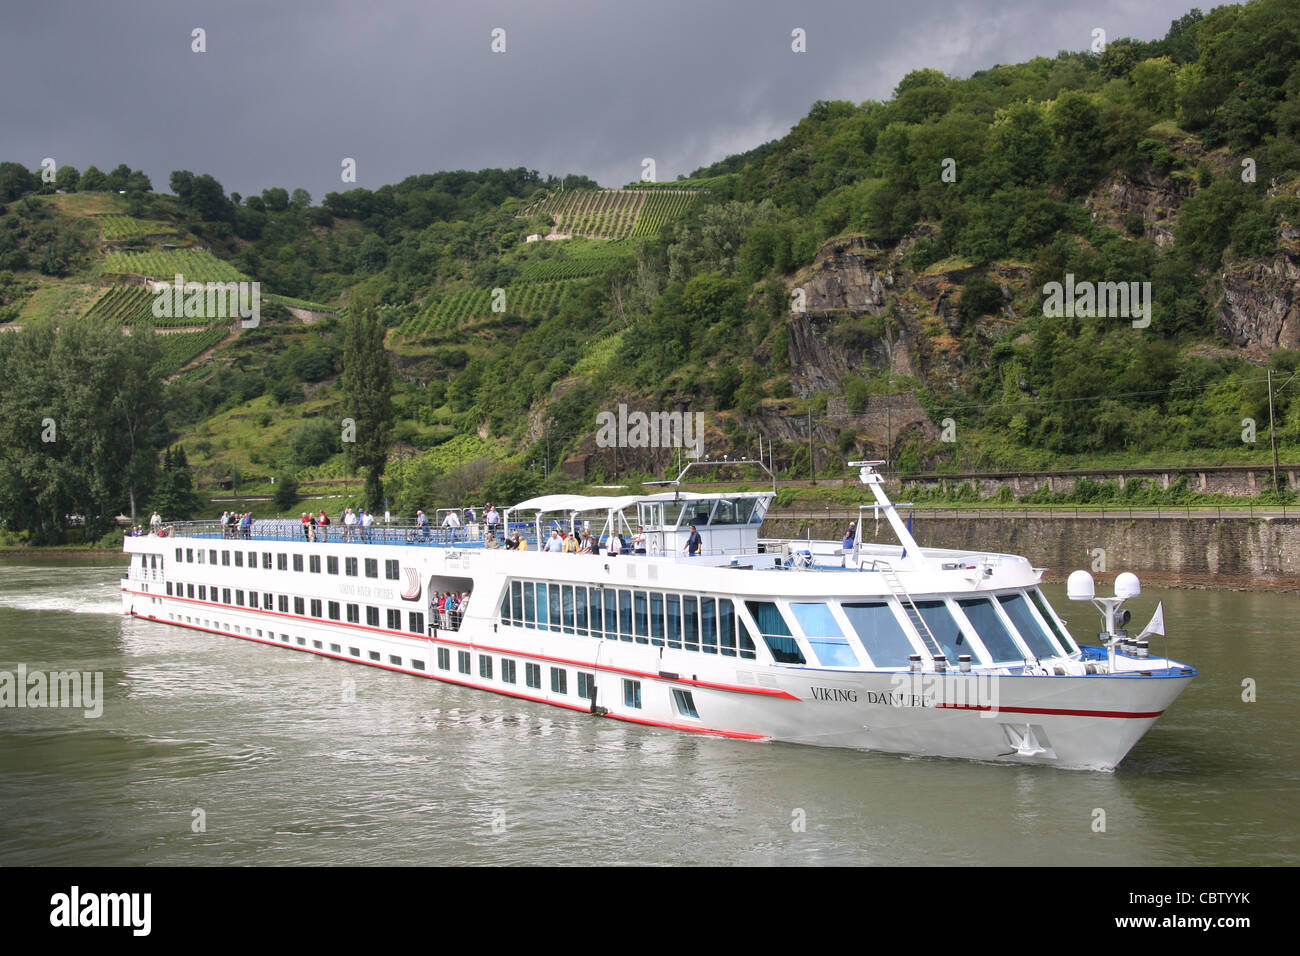 The Viking Danube just upstream of the Lorelei on the Rhine River, Germany Stock Photo